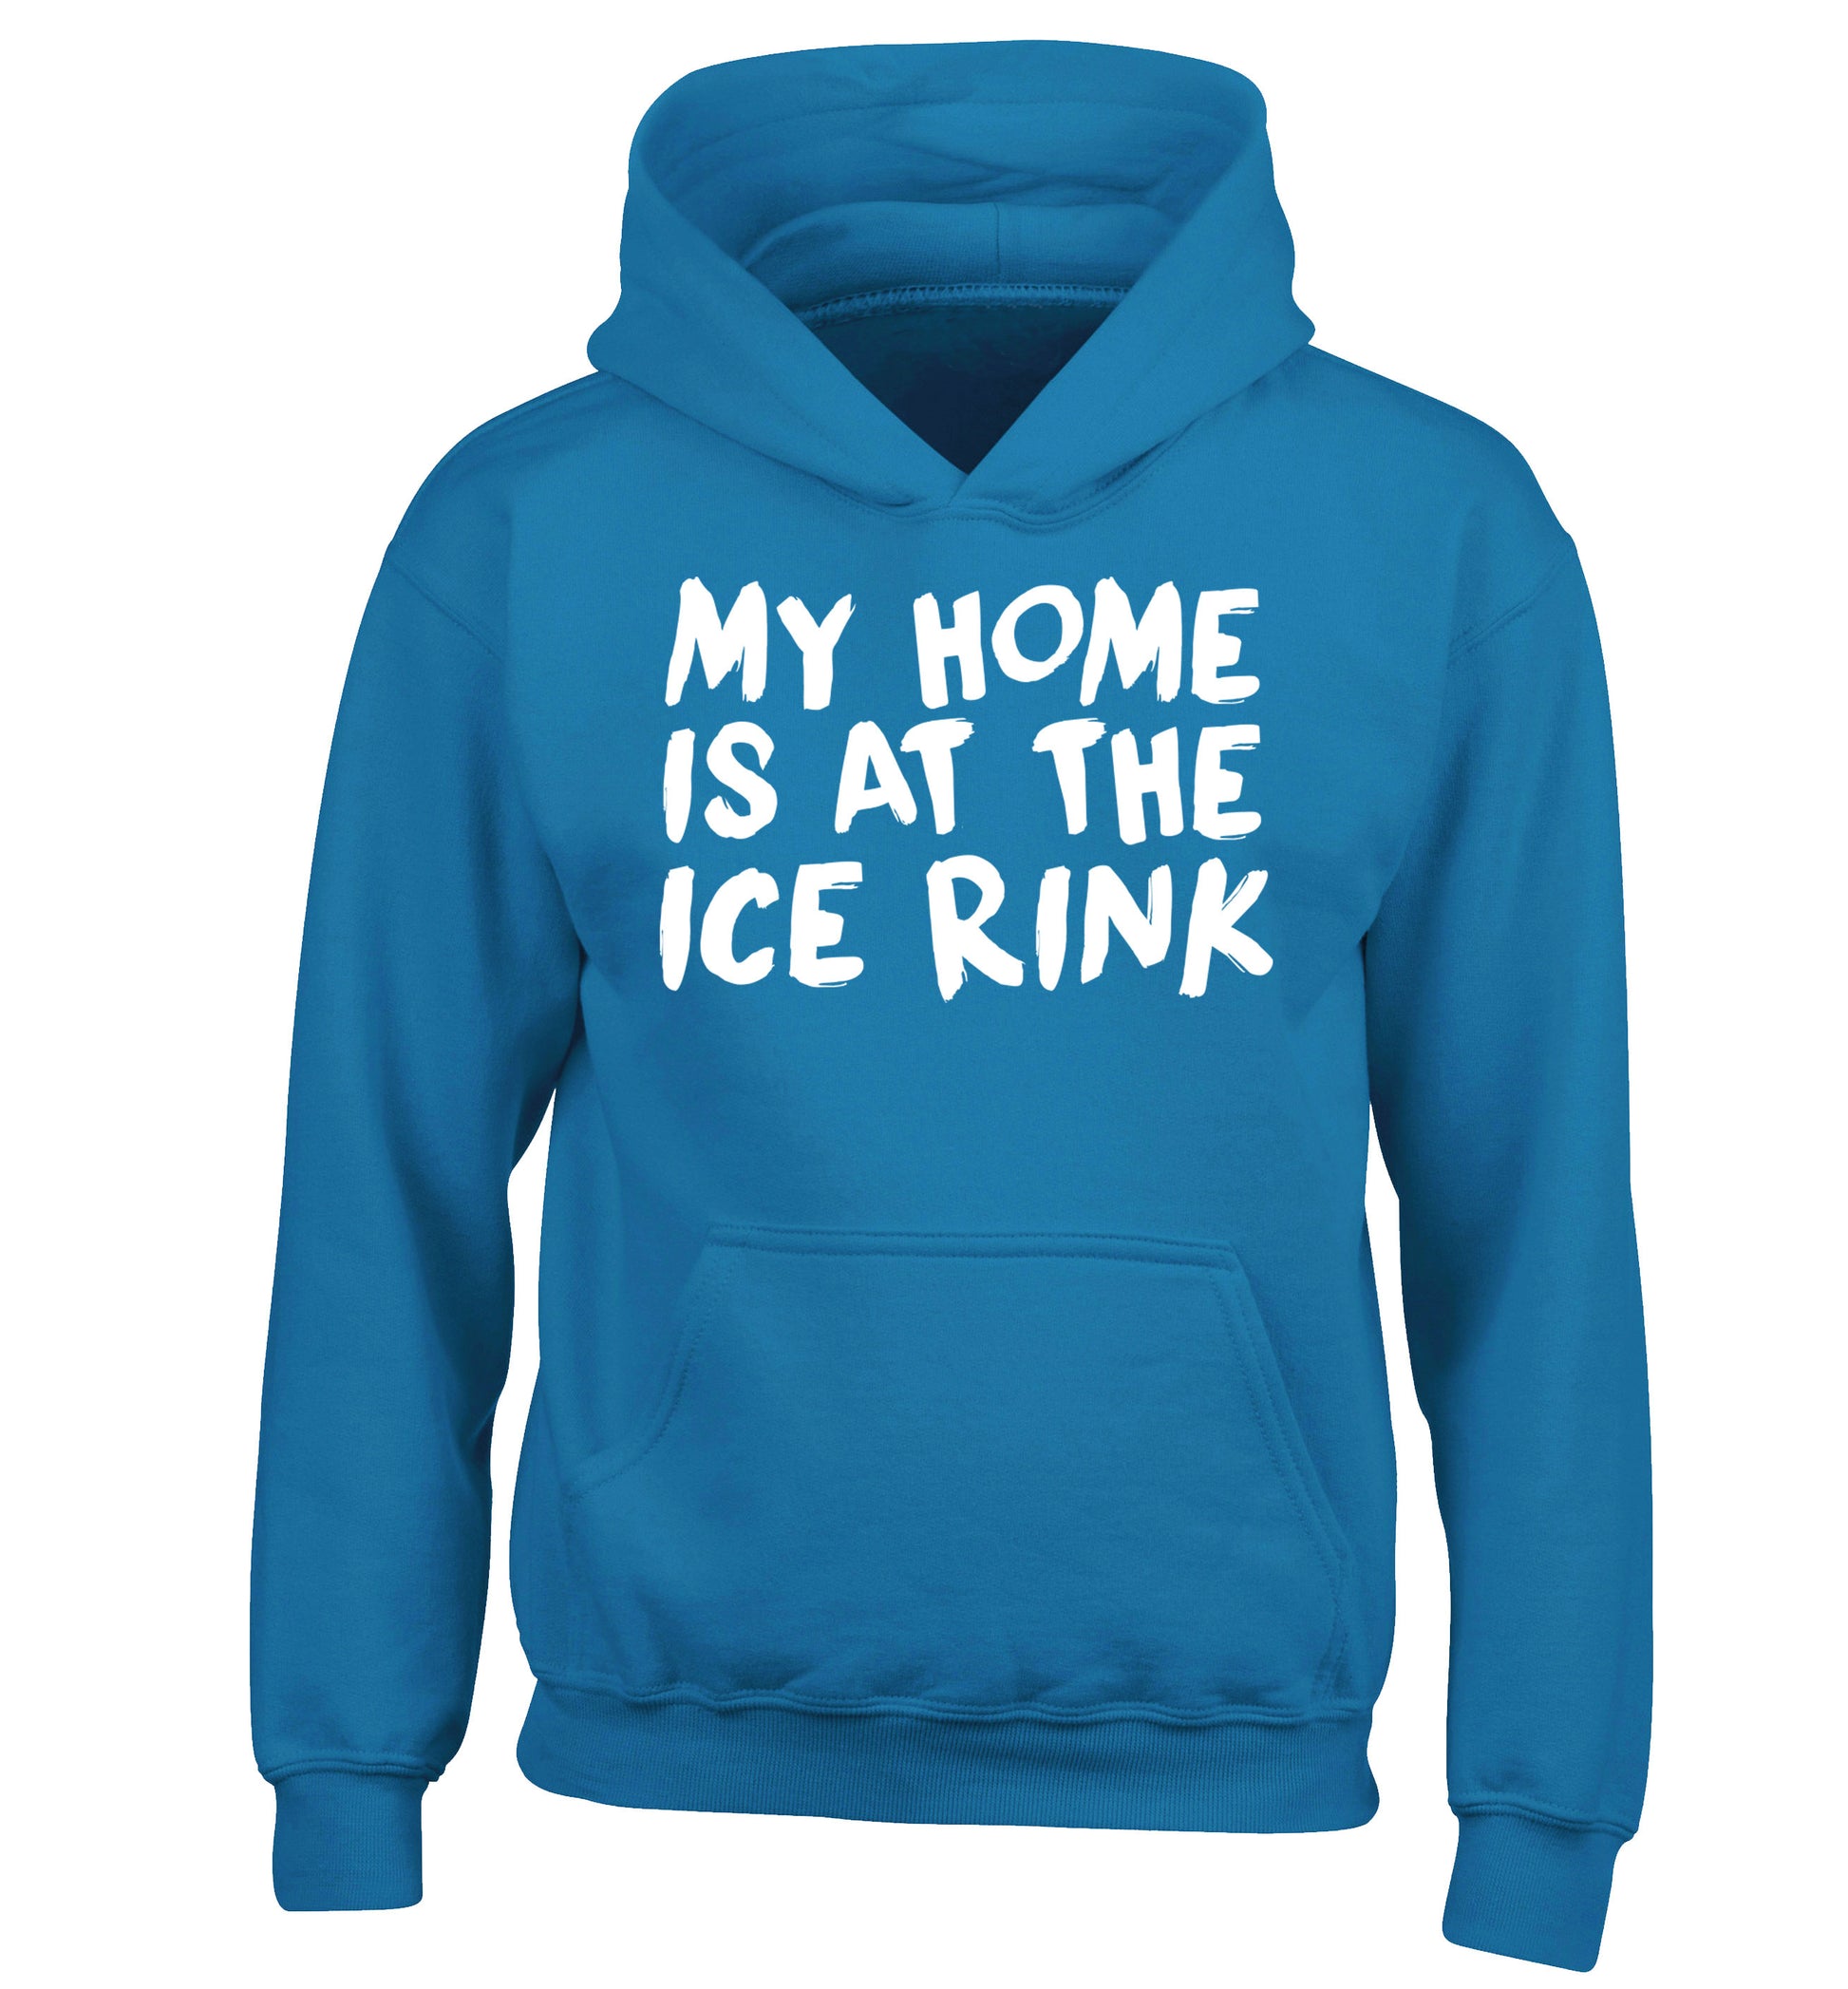 My home is at the ice rink children's blue hoodie 12-14 Years